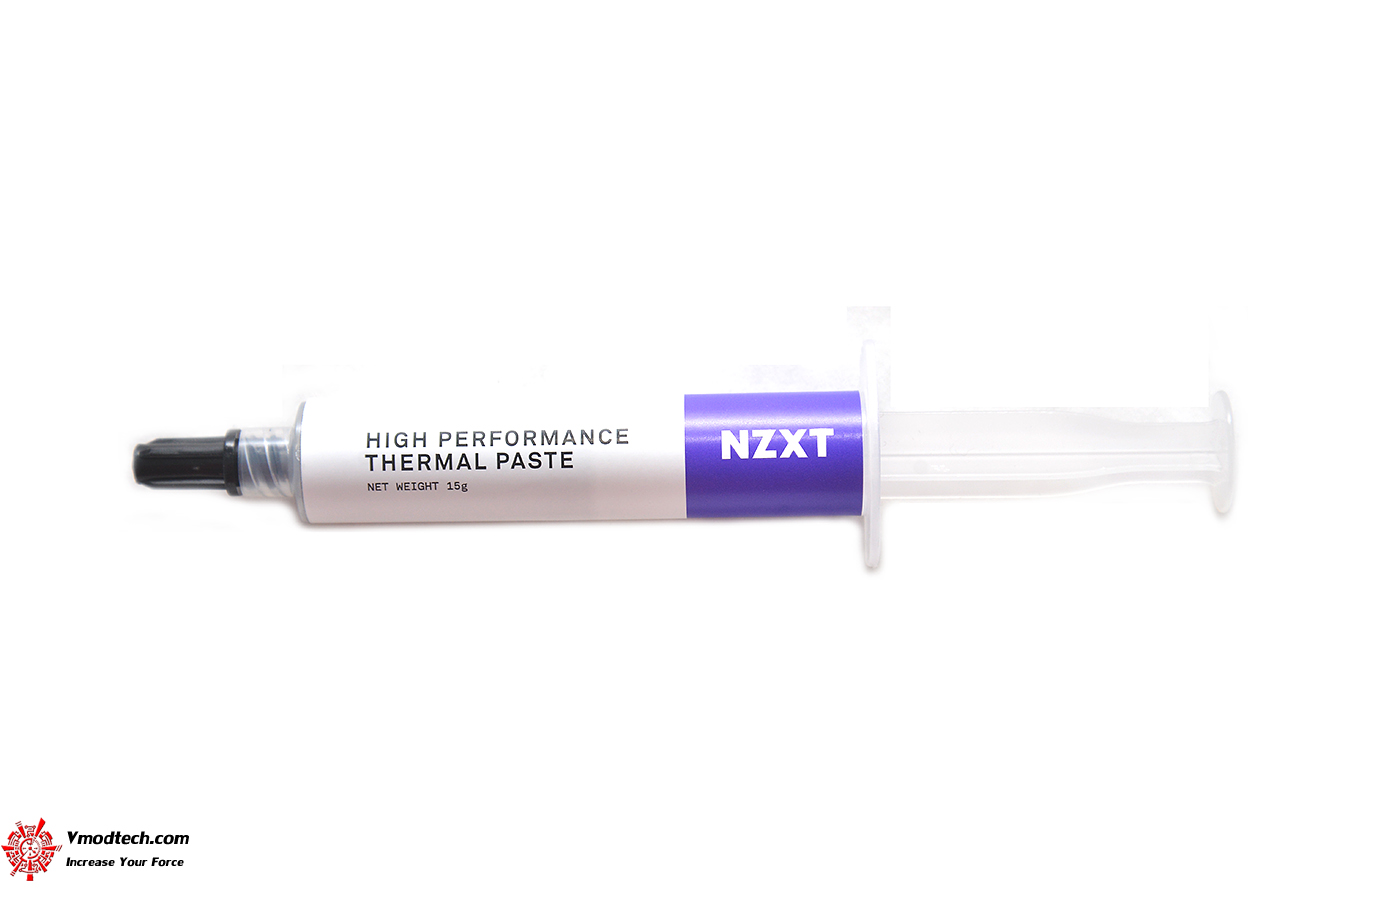 dsc 1464 NZXT High performance Thermal Paste (15g) Review